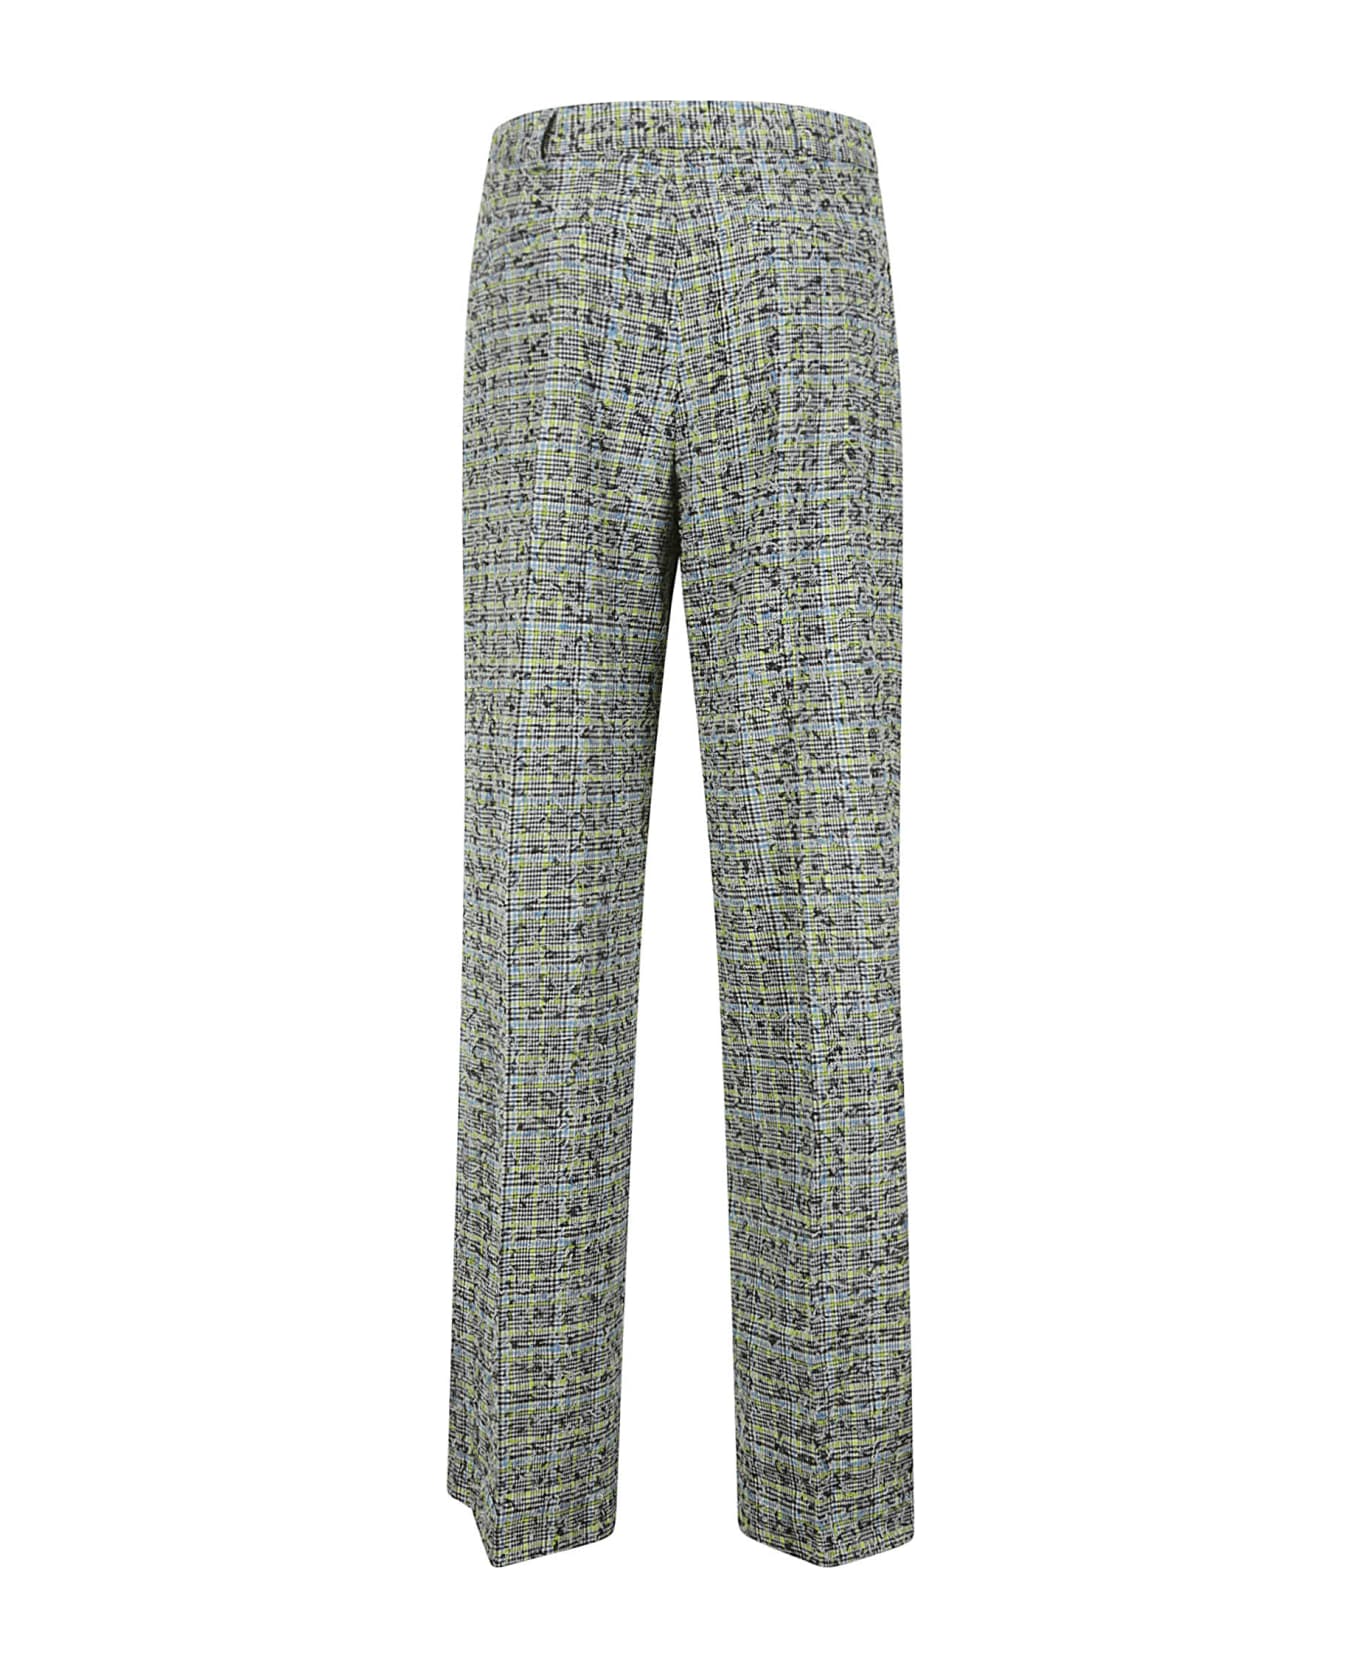 Stine Goya Jesabelle, 1910 Textured Casual Check - CHECK ボトムス